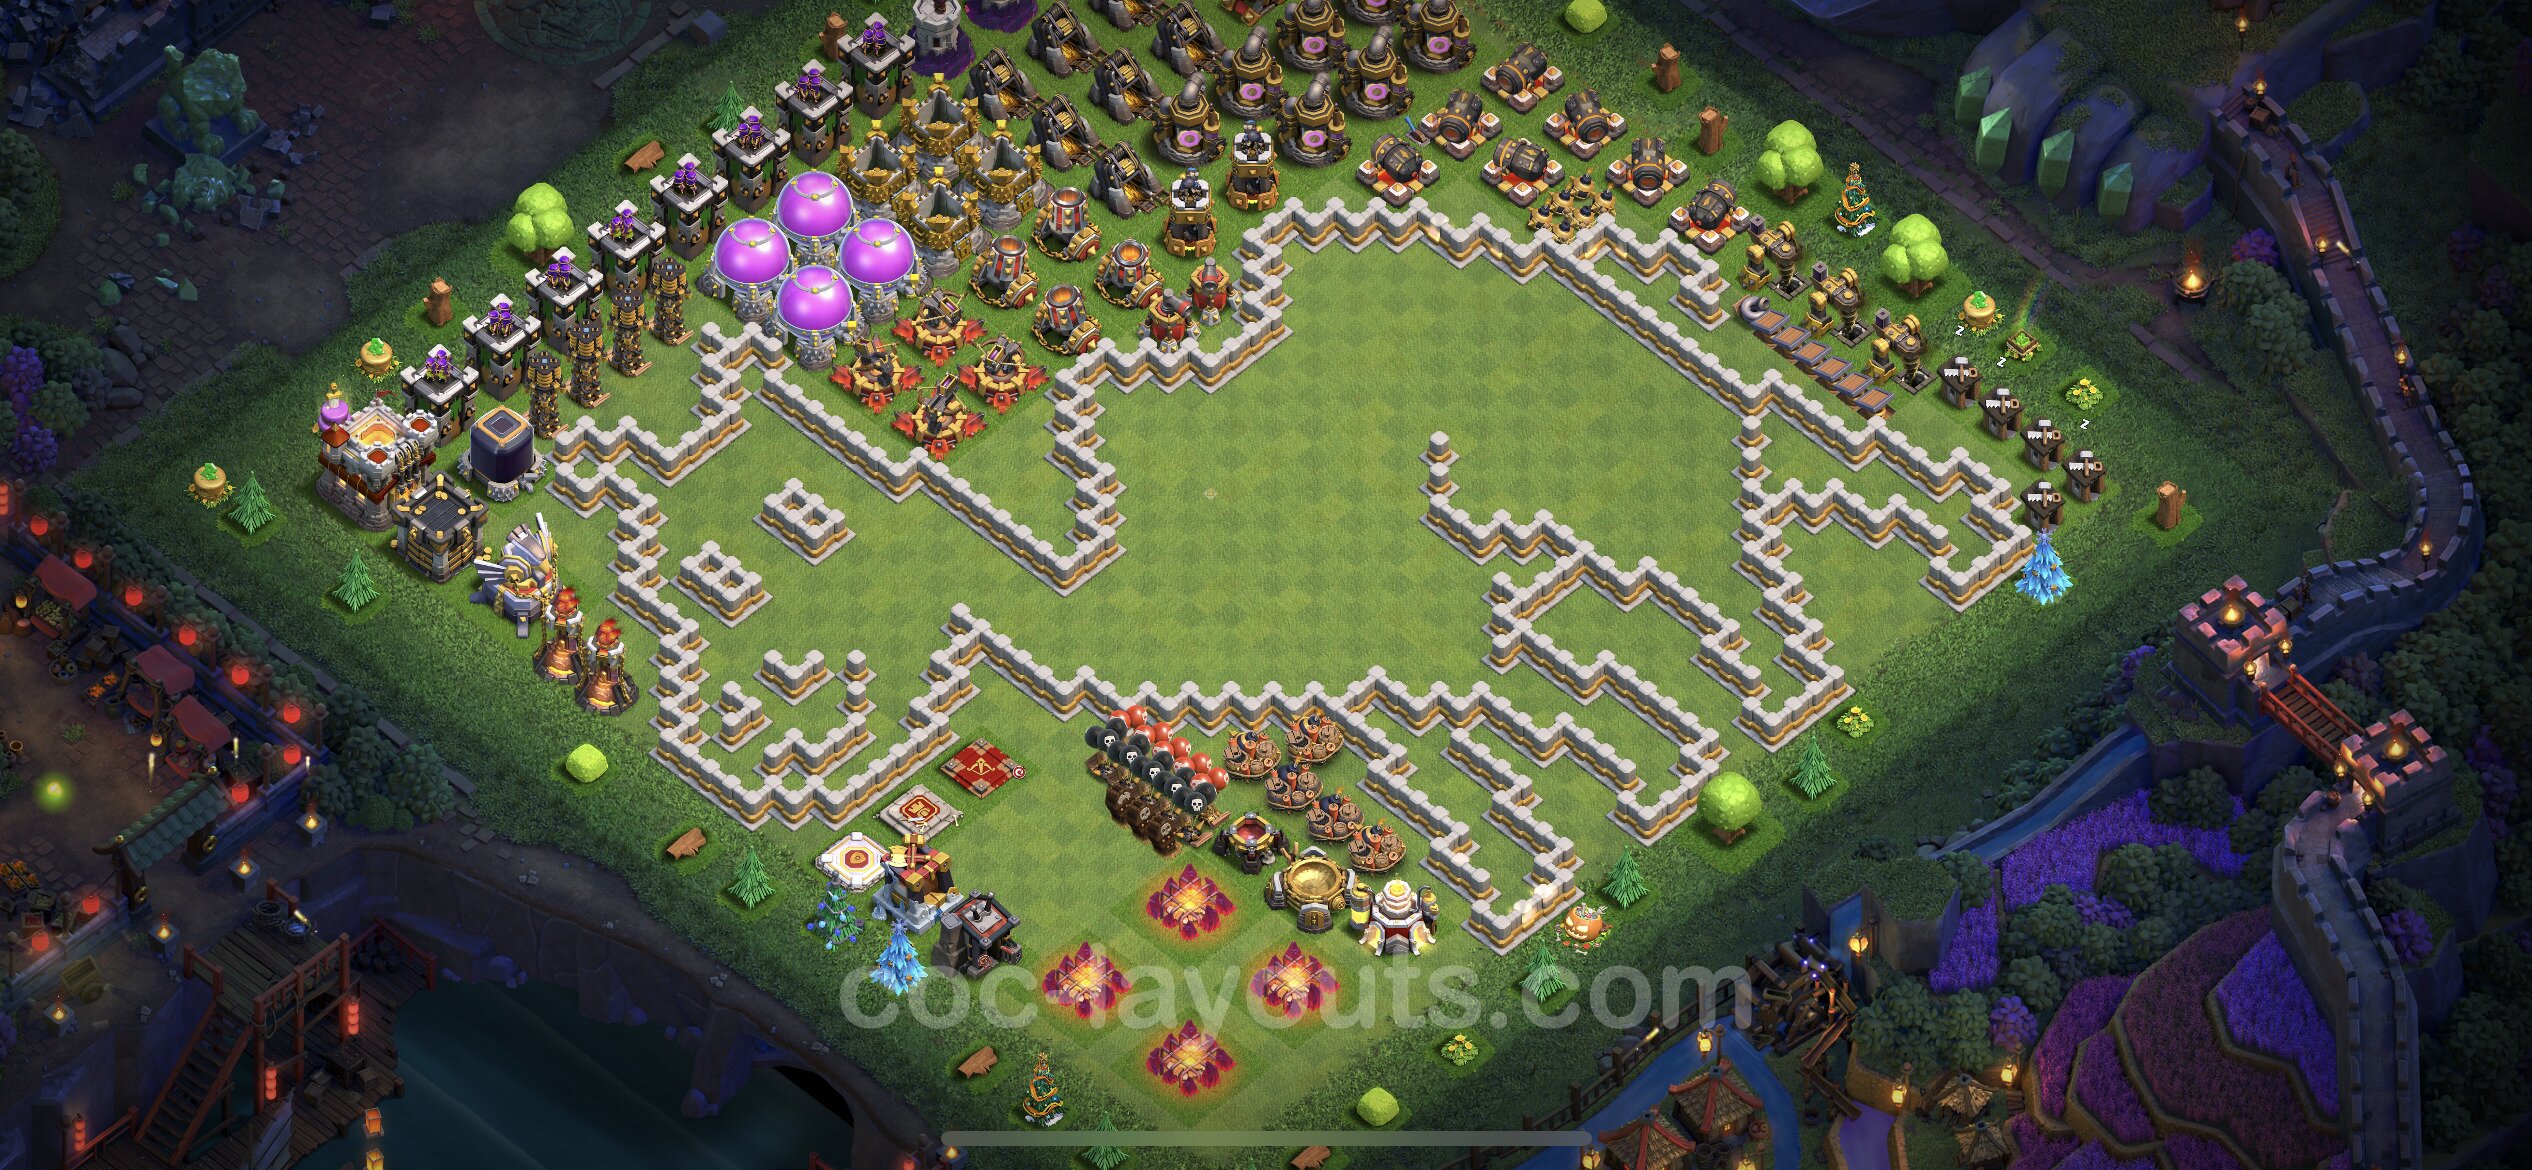 Best Funny Troll Base TH11 with Link - Town Hall Level 11 Art Base Copy -  (#7)